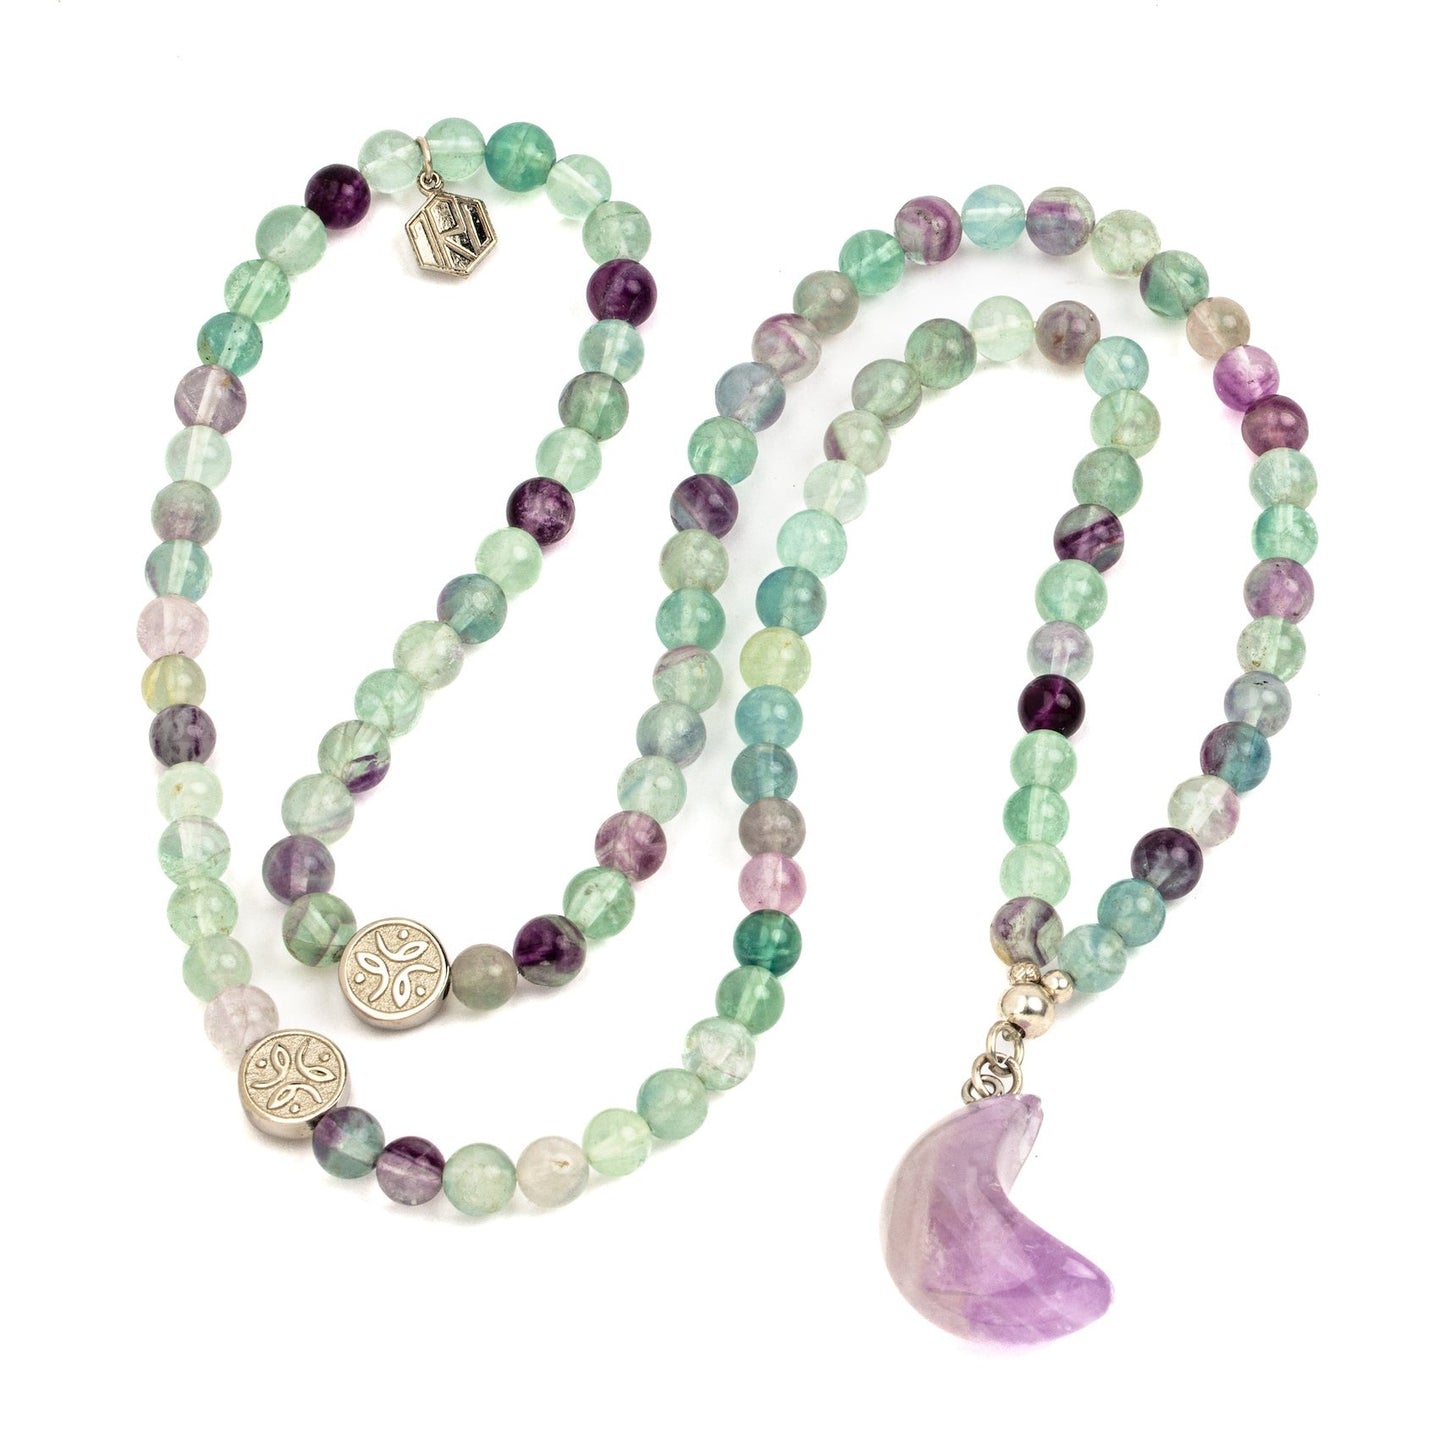 fluorite beads with amethyst half moon necklace